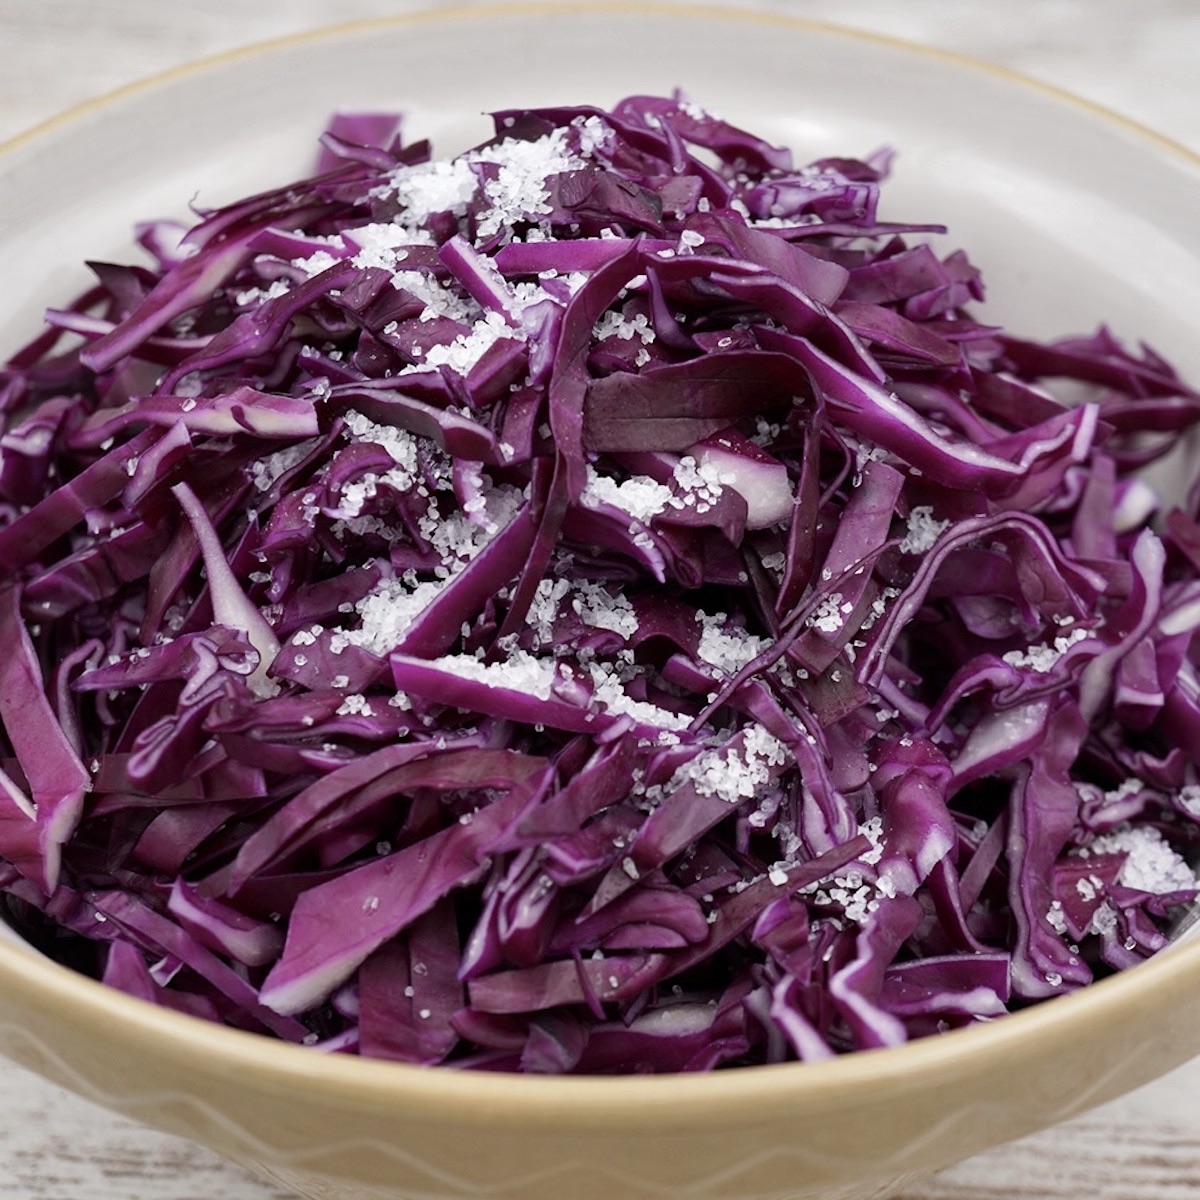 A bowl of shredded red cabbage with salt sprinkled on top.